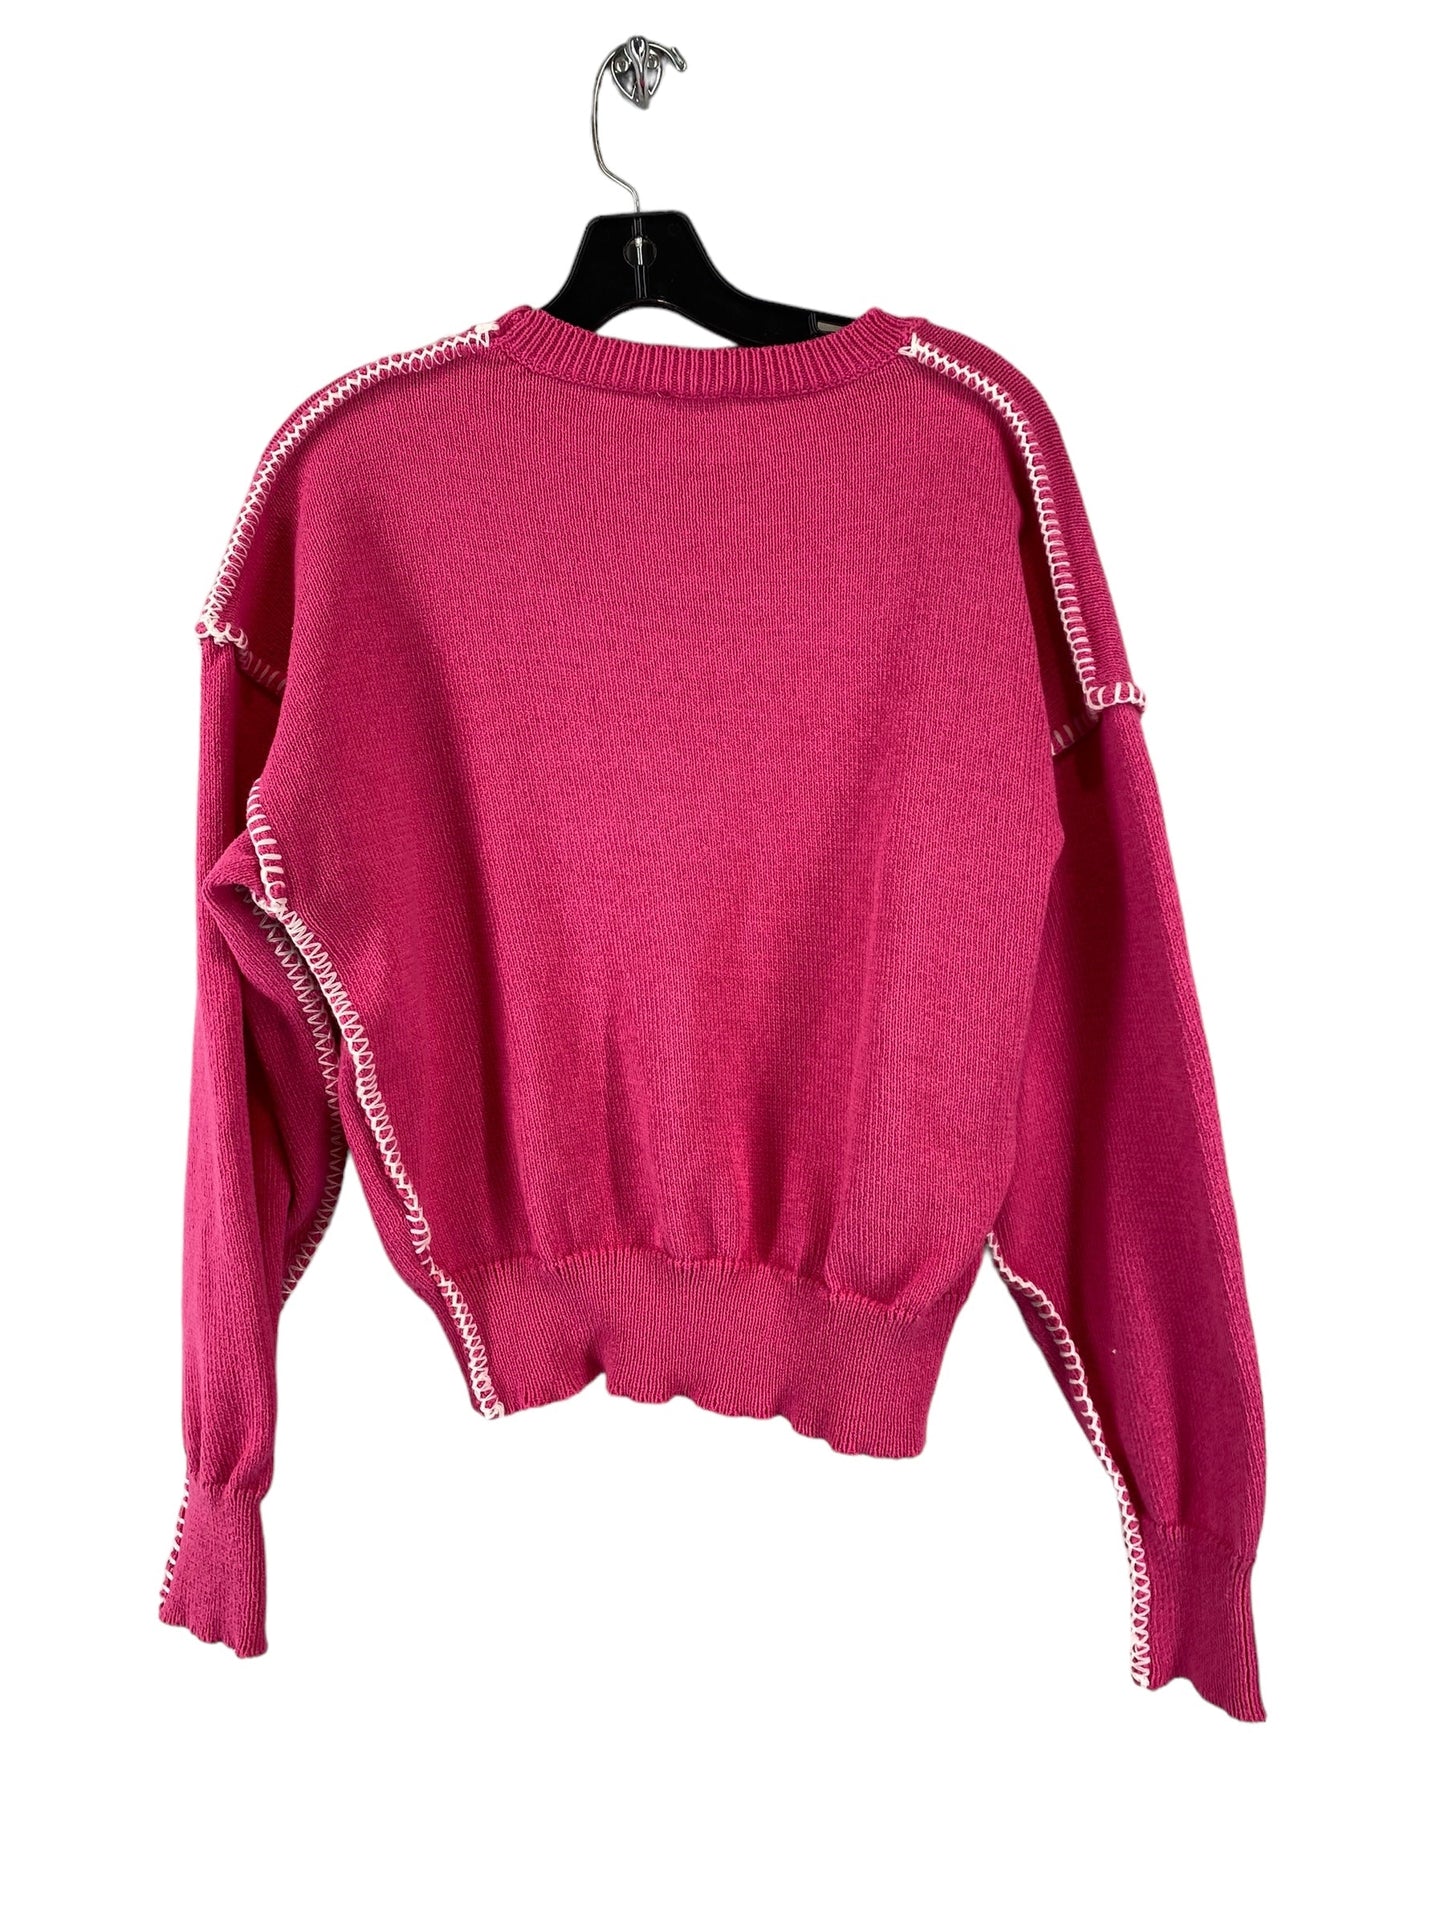 Pink Sweater Le Lis, Size M